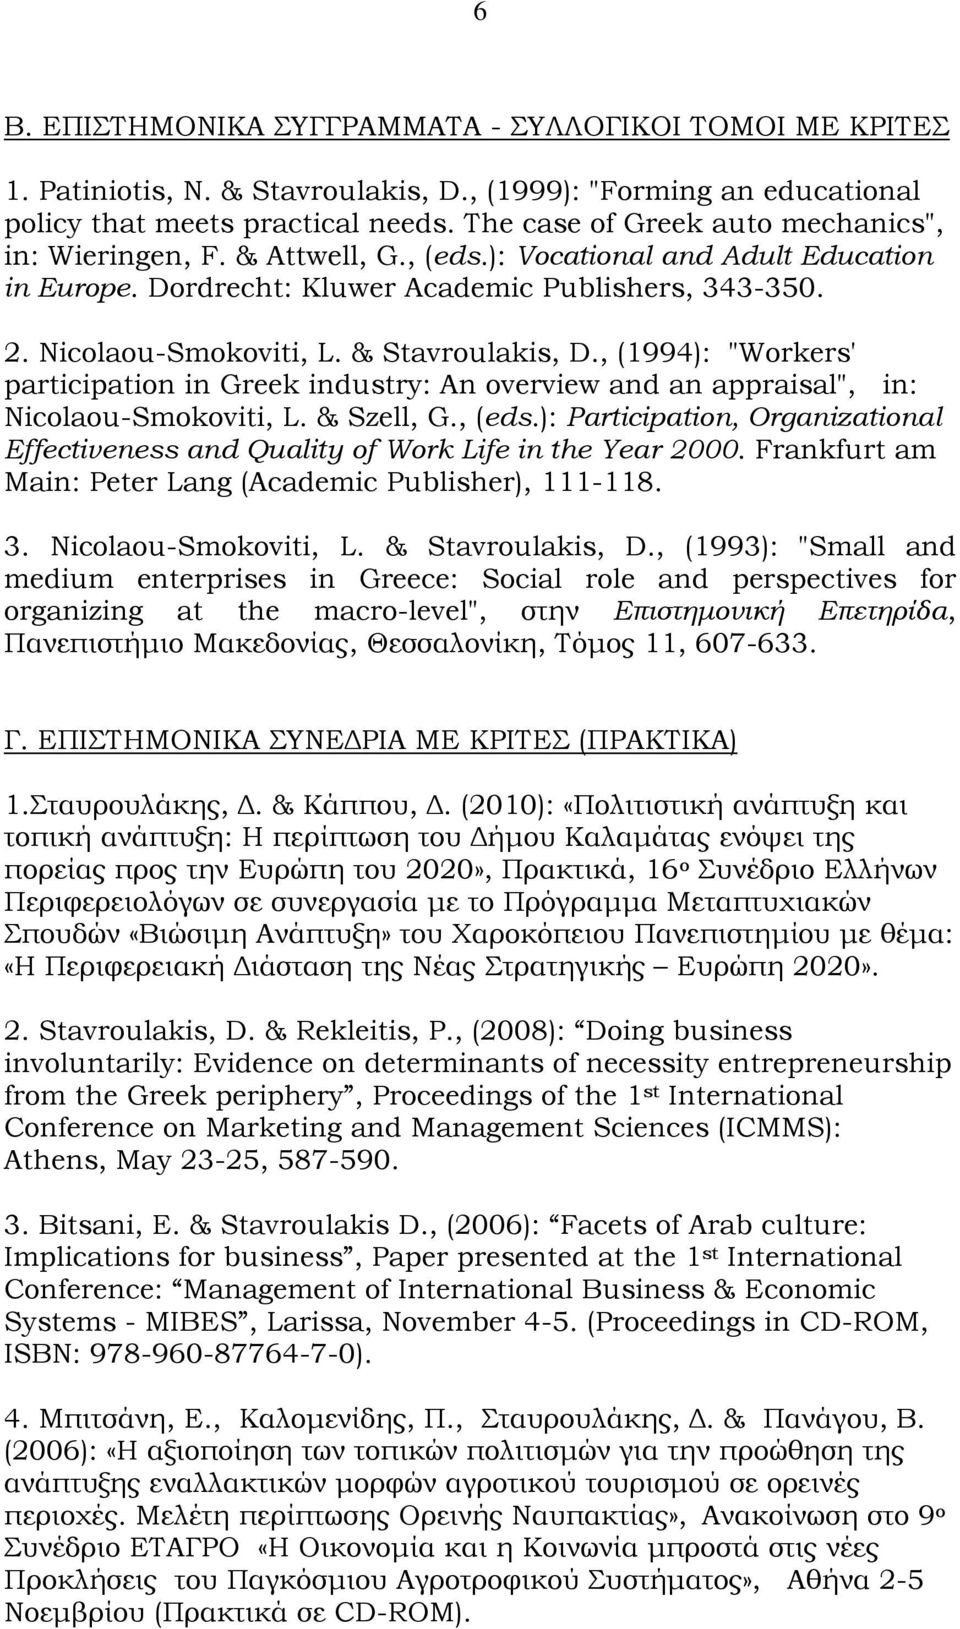 & Stavroulakis, D., (1994): "Workers' participation in Greek industry: An overview and an appraisal", in: Nicolaou-Smokoviti, L. & Szell, G., (eds.